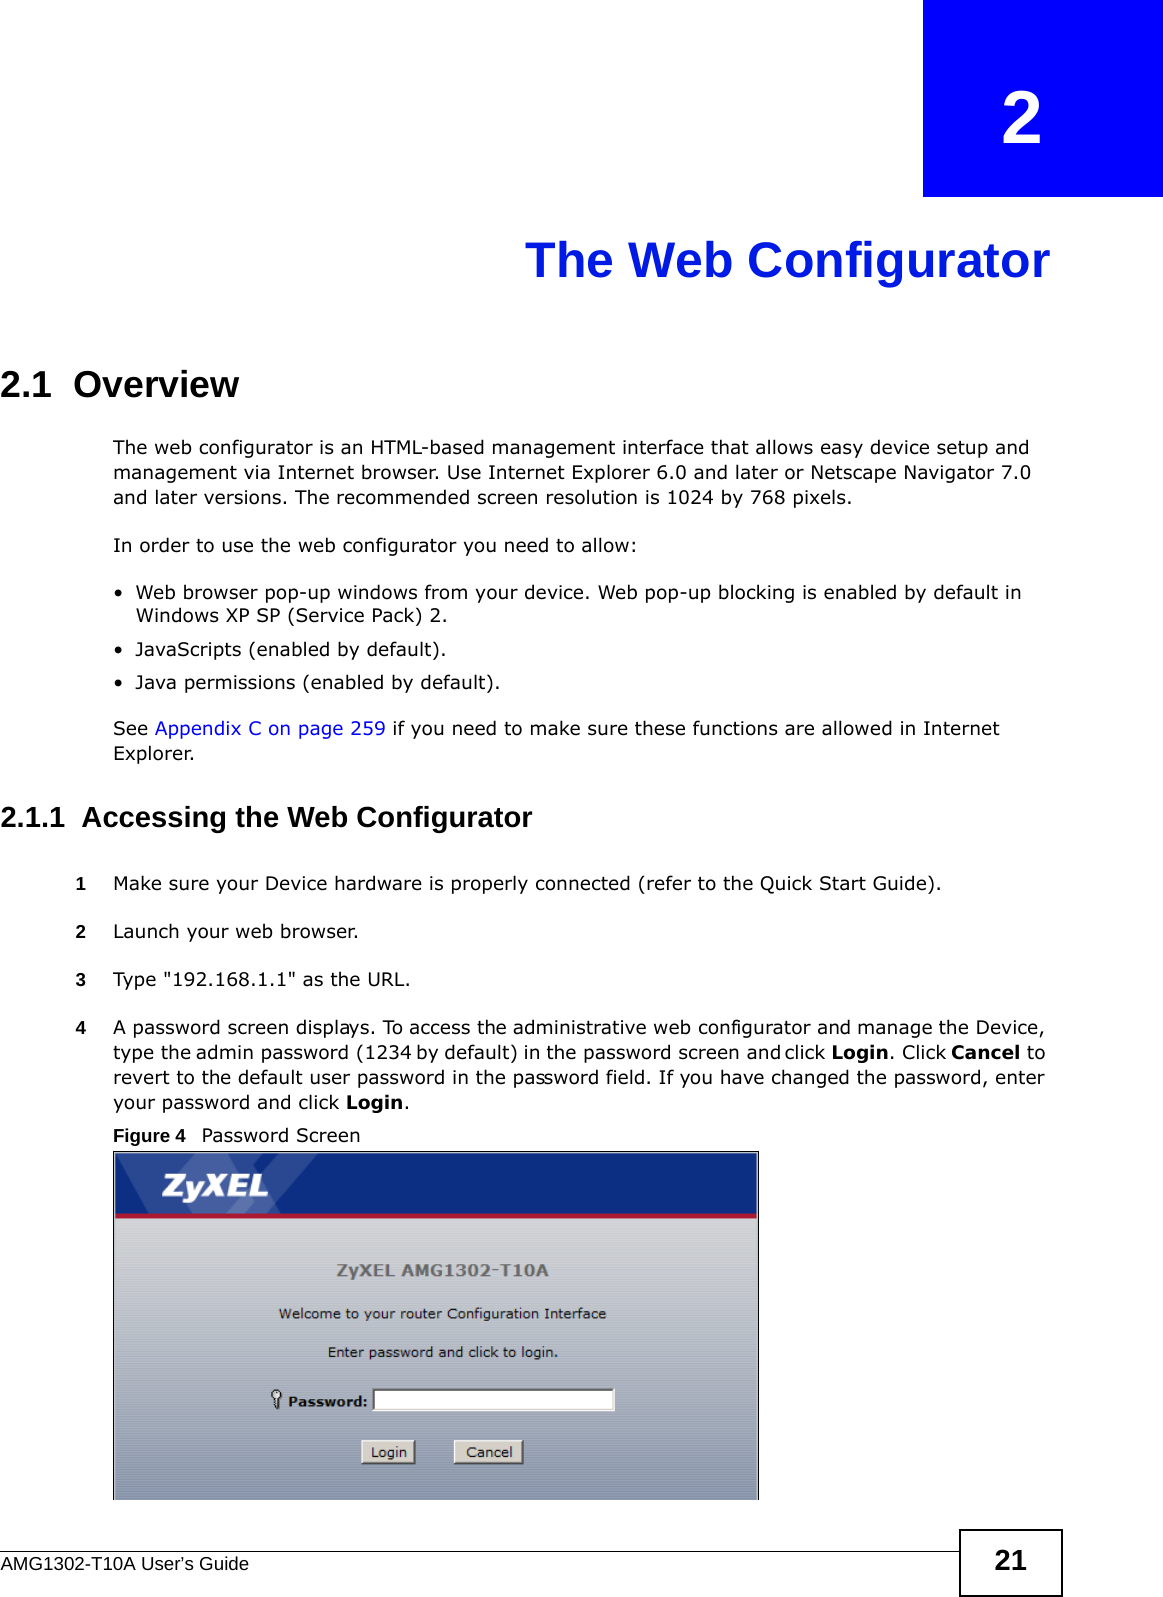 AMG1302-T10A User’s Guide 21CHAPTER   2The Web Configurator2.1  OverviewThe web configurator is an HTML-based management interface that allows easy device setup and management via Internet browser. Use Internet Explorer 6.0 and later or Netscape Navigator 7.0 and later versions. The recommended screen resolution is 1024 by 768 pixels.In order to use the web configurator you need to allow:• Web browser pop-up windows from your device. Web pop-up blocking is enabled by default in Windows XP SP (Service Pack) 2.• JavaScripts (enabled by default).• Java permissions (enabled by default).See Appendix C on page 259 if you need to make sure these functions are allowed in Internet Explorer.2.1.1  Accessing the Web Configurator1Make sure your Device hardware is properly connected (refer to the Quick Start Guide).2Launch your web browser.3Type &quot;192.168.1.1&quot; as the URL.4A password screen displays. To access the administrative web configurator and manage the Device, type the admin password (1234 by default) in the password screen and click Login. Click Cancel to revert to the default user password in the password field. If you have changed the password, enter your password and click Login.Figure 4   Password Screen